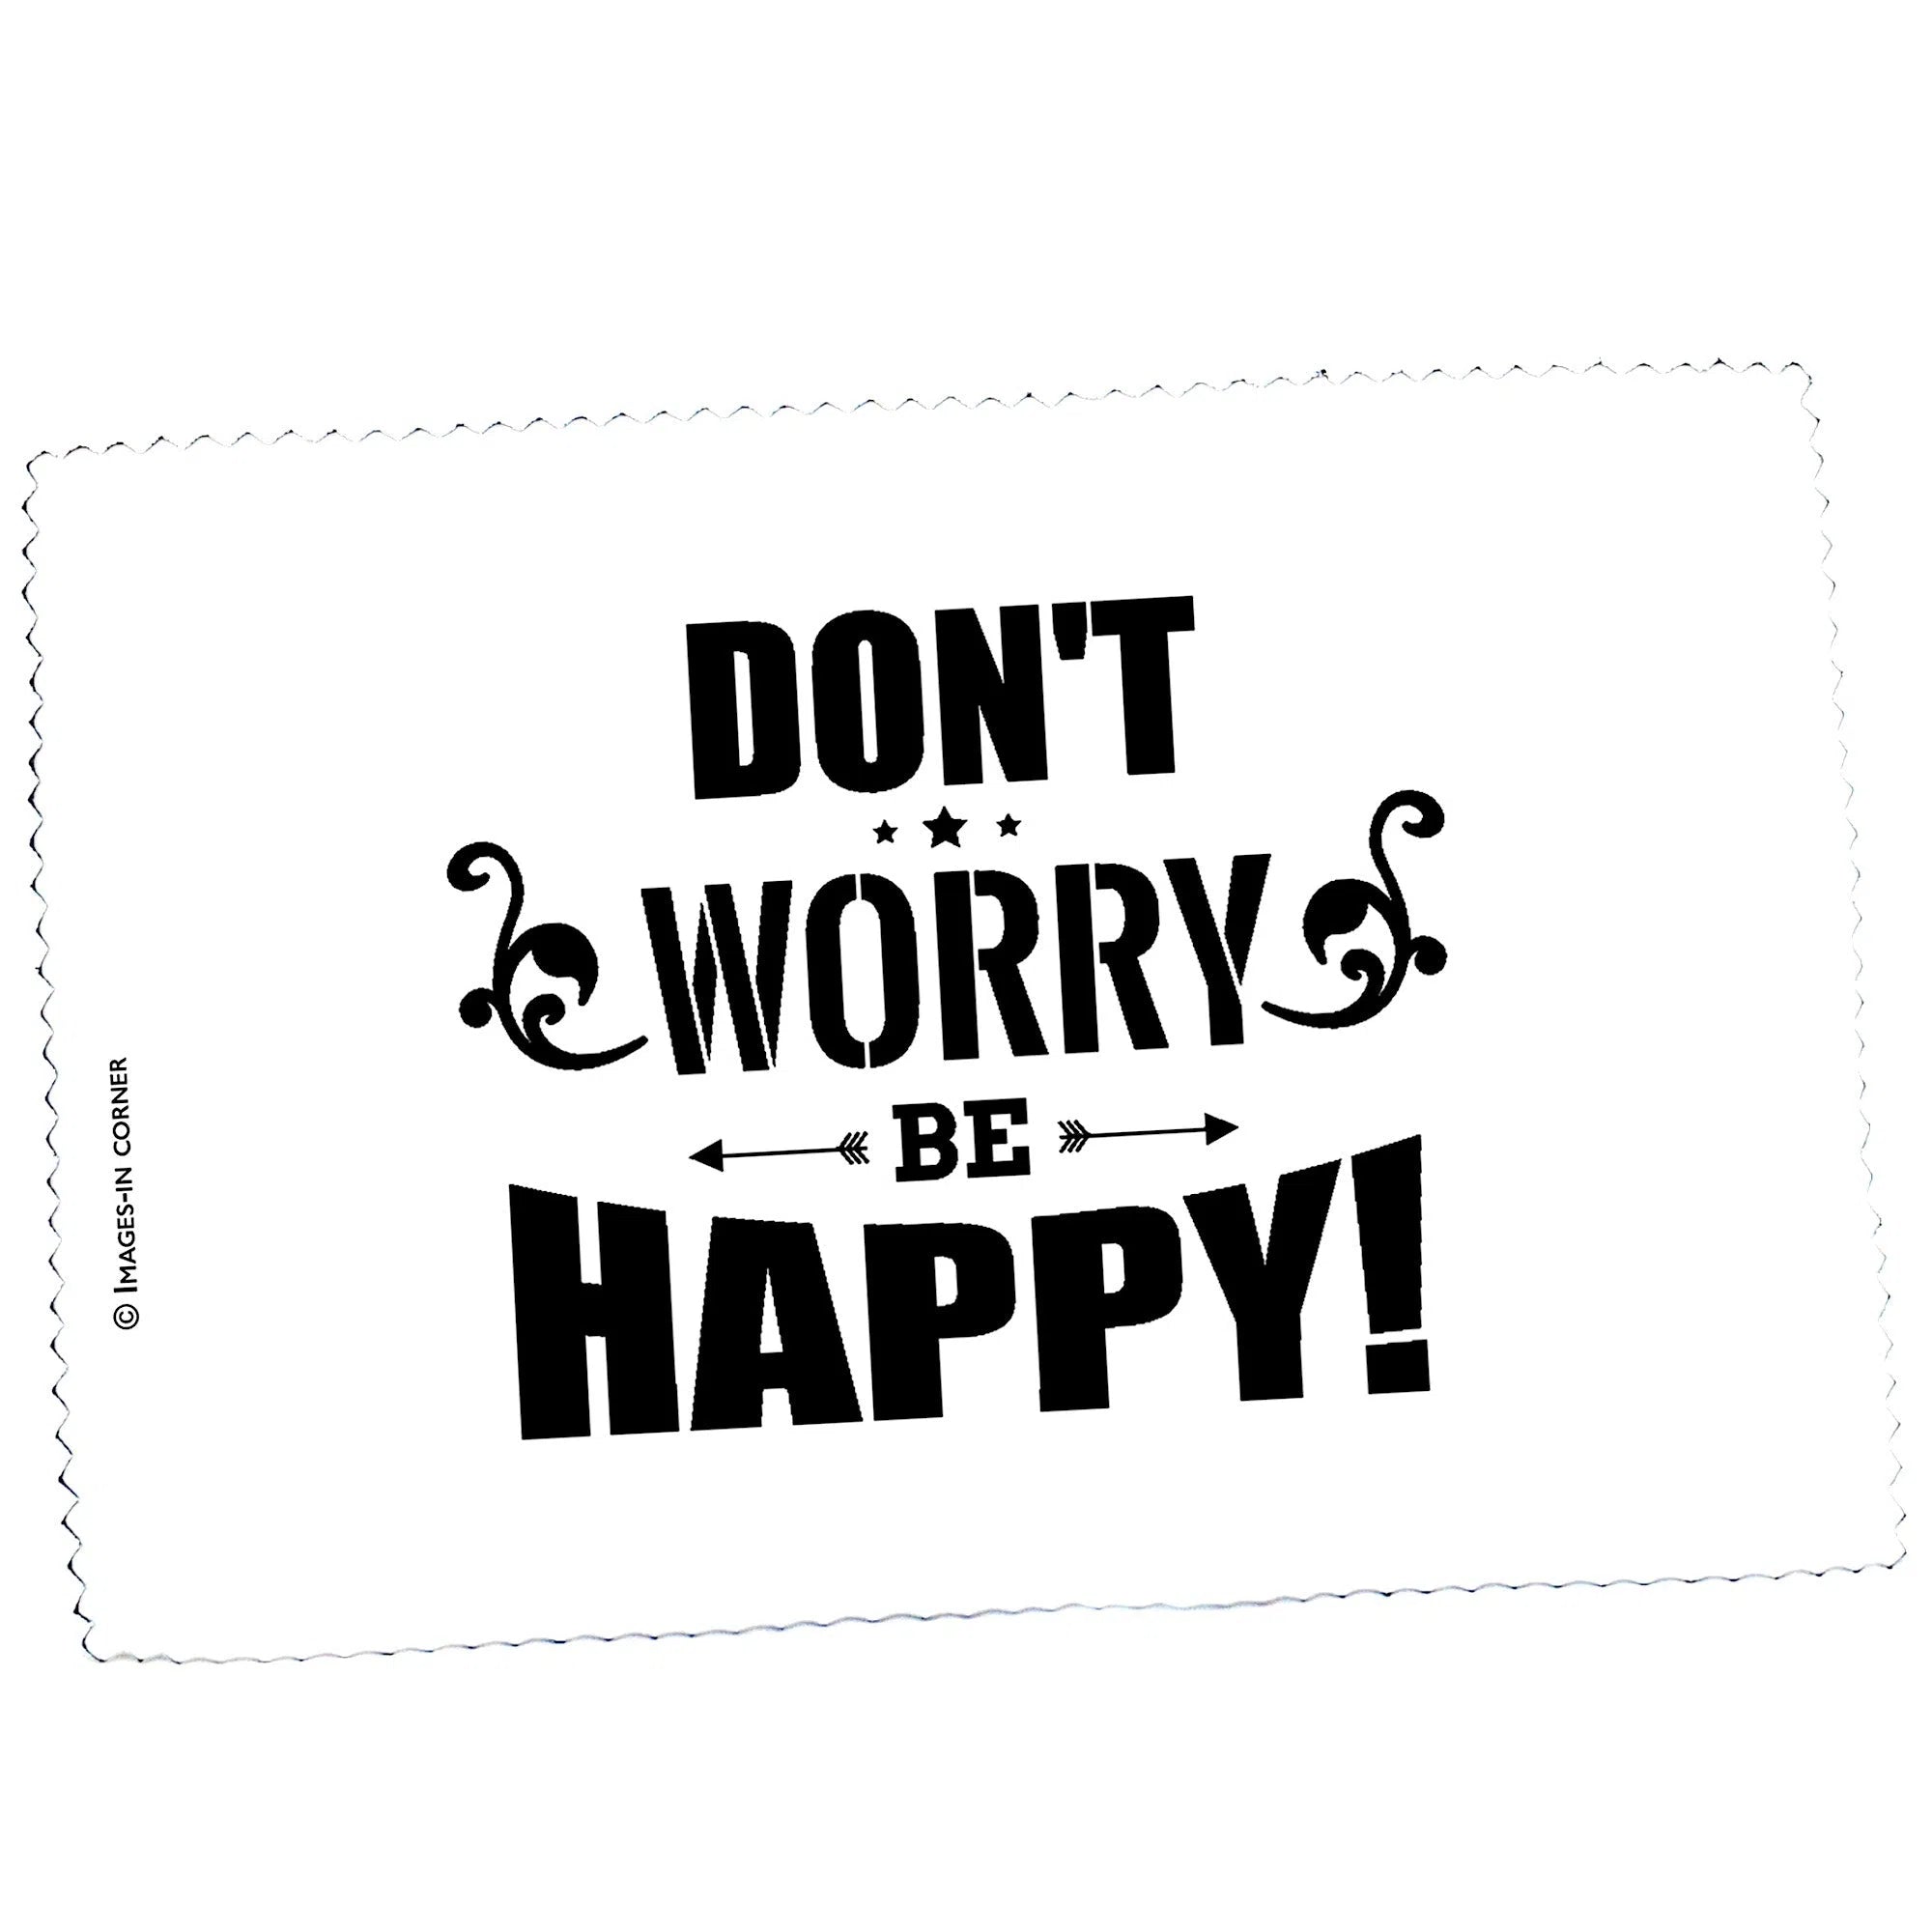 Don't worry, be happy-Imagesdartistes